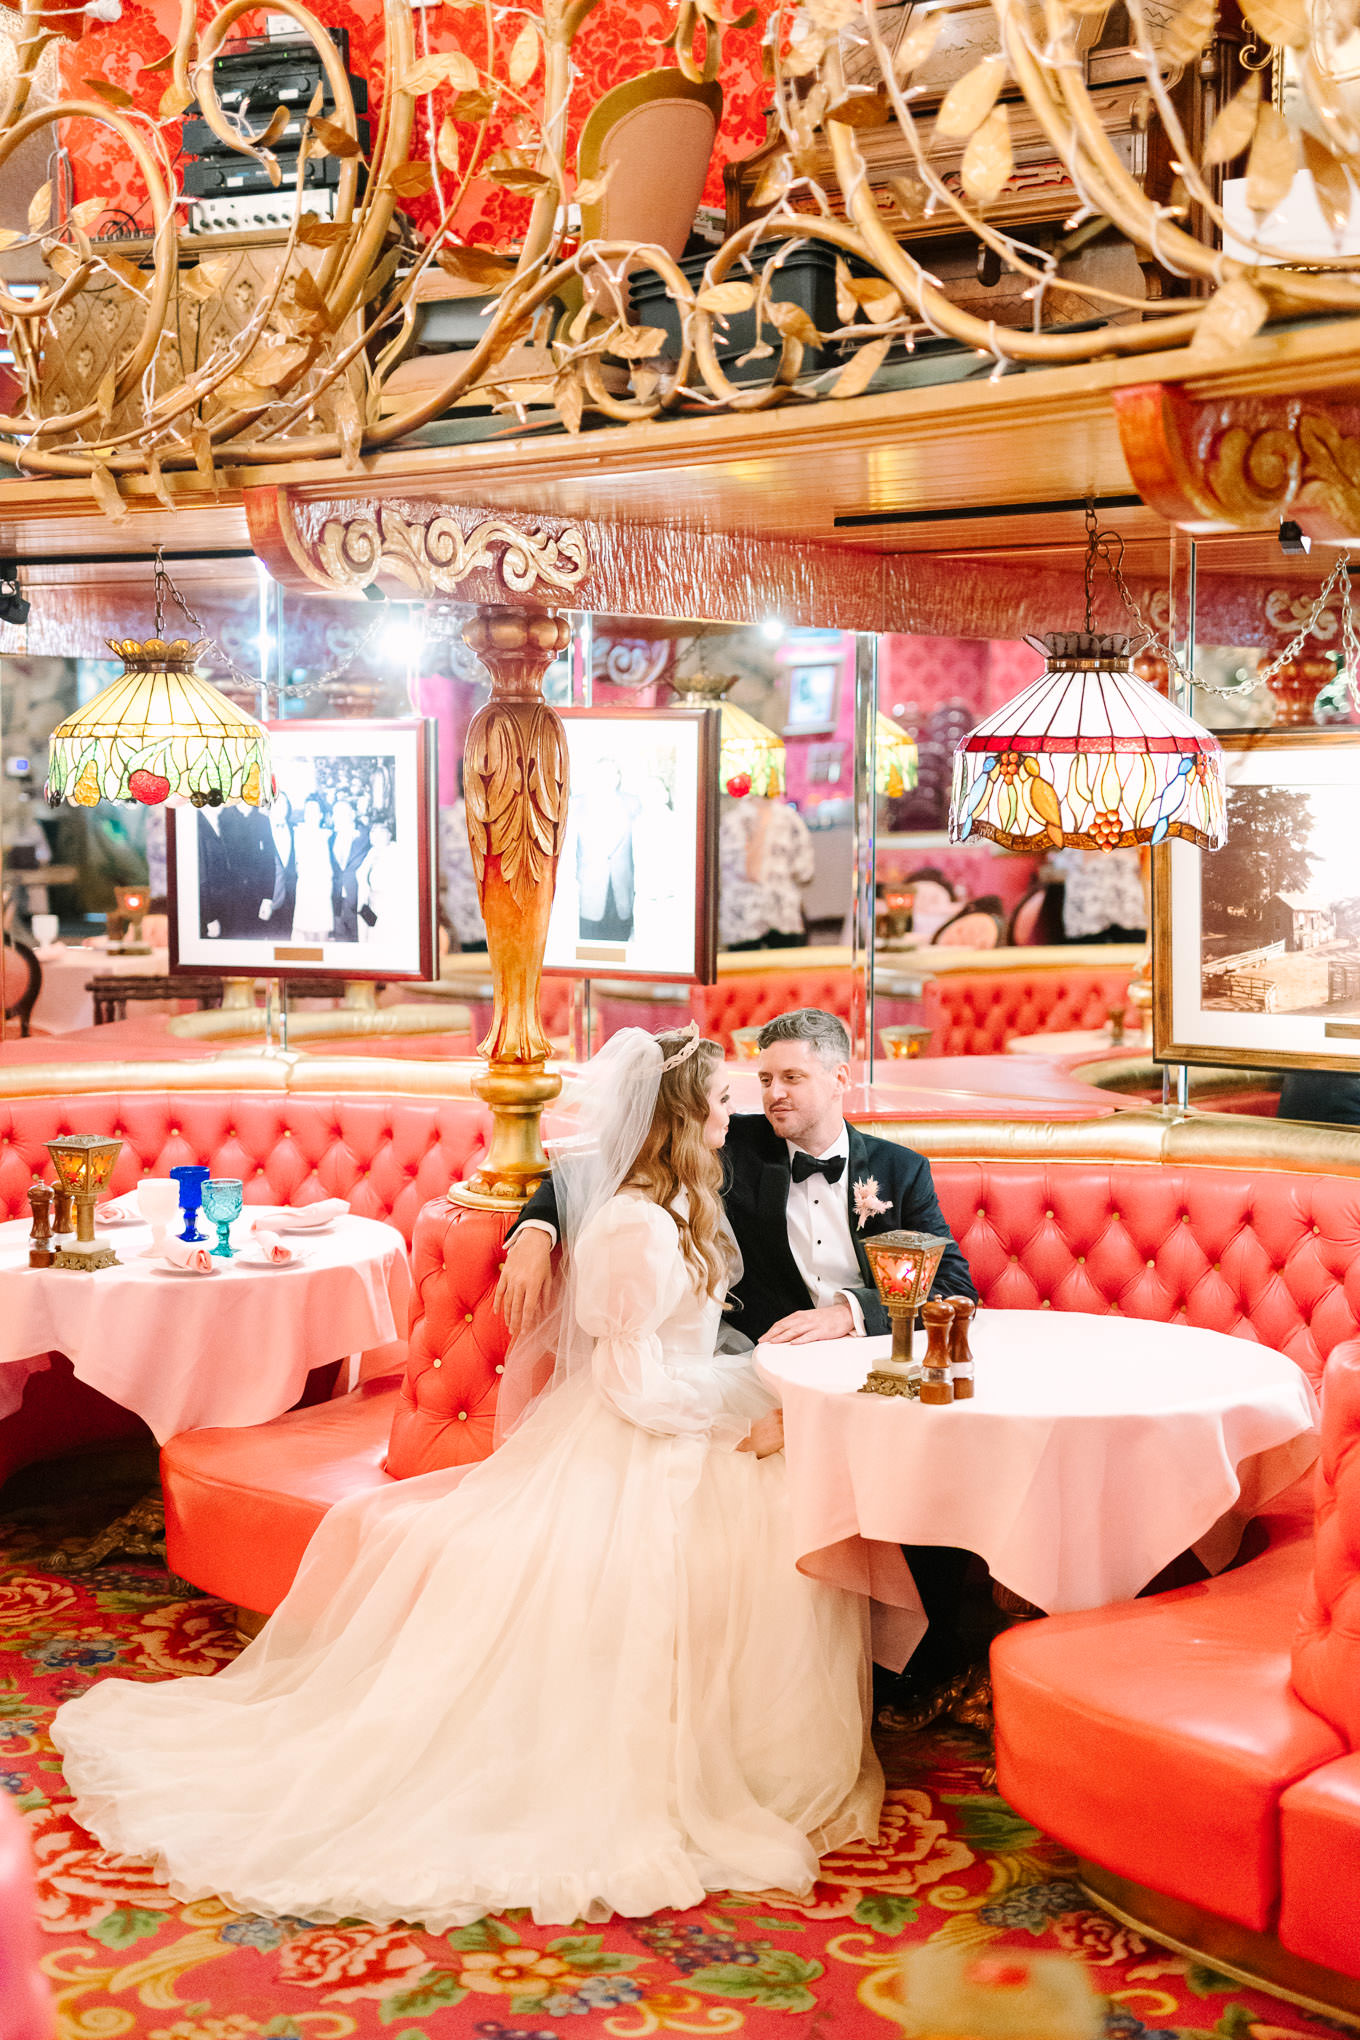 Allison Harvard & Jeremy Burke wedding portraits at the Madonna Inn | Colorful and quirky wedding at Higuera Ranch in San Luis Obispo | #sanluisobispowedding #californiawedding #higueraranch #madonnainn   Source: Mary Costa Photography | Los Angeles